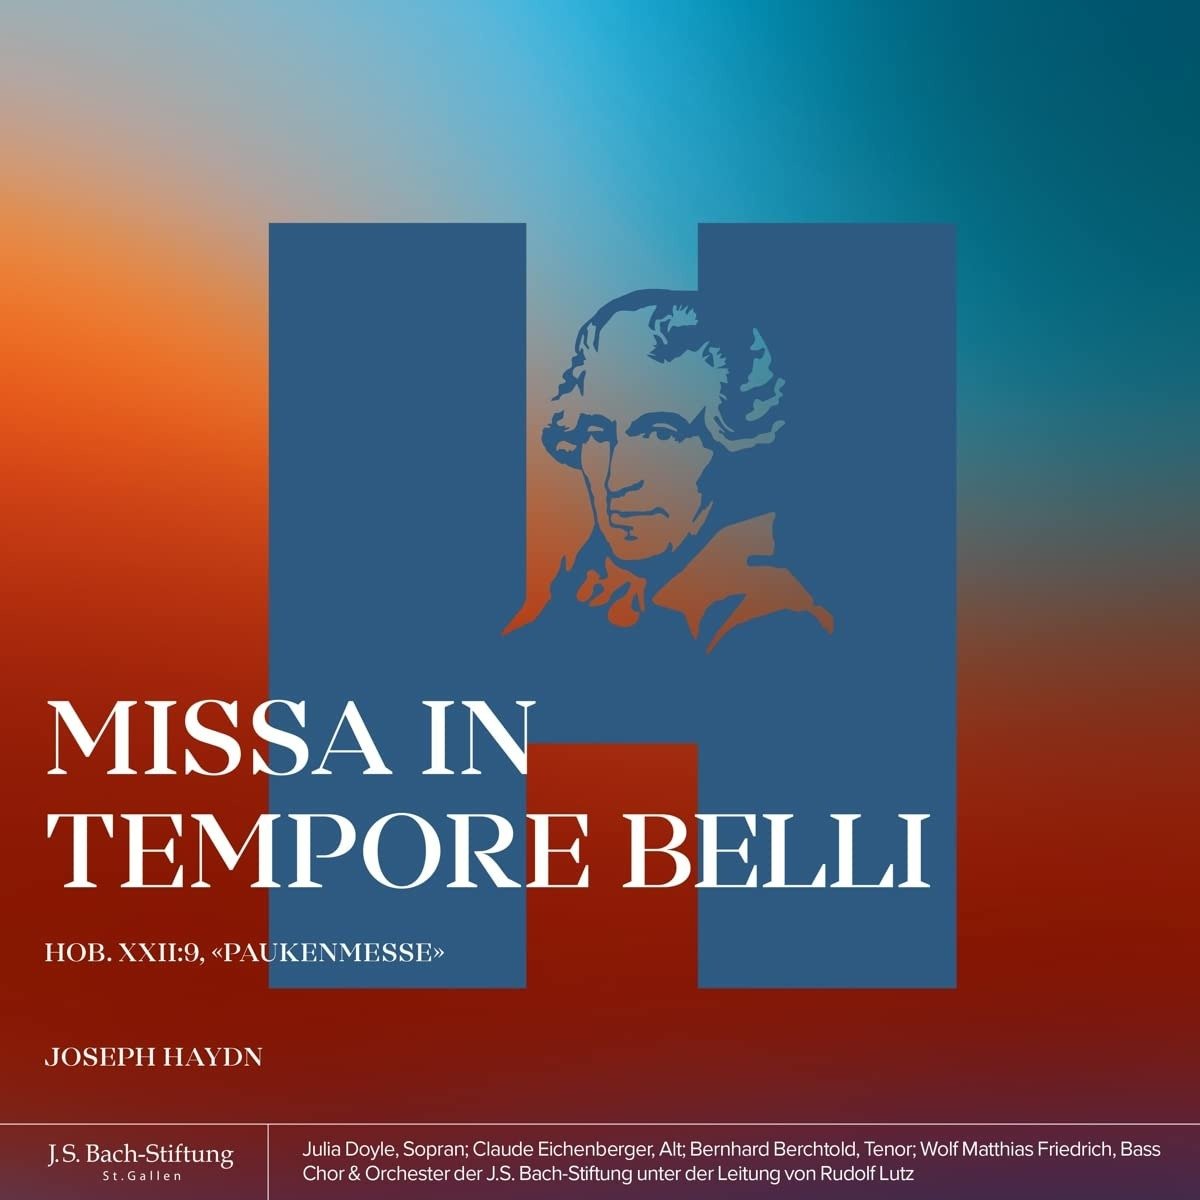 CD Shop - CHOIR & ORCHESTRA OF THE HAYDN: MISSA IN TEMPORE BBELLI, HOB. XXII:9/PAUKENMESSE